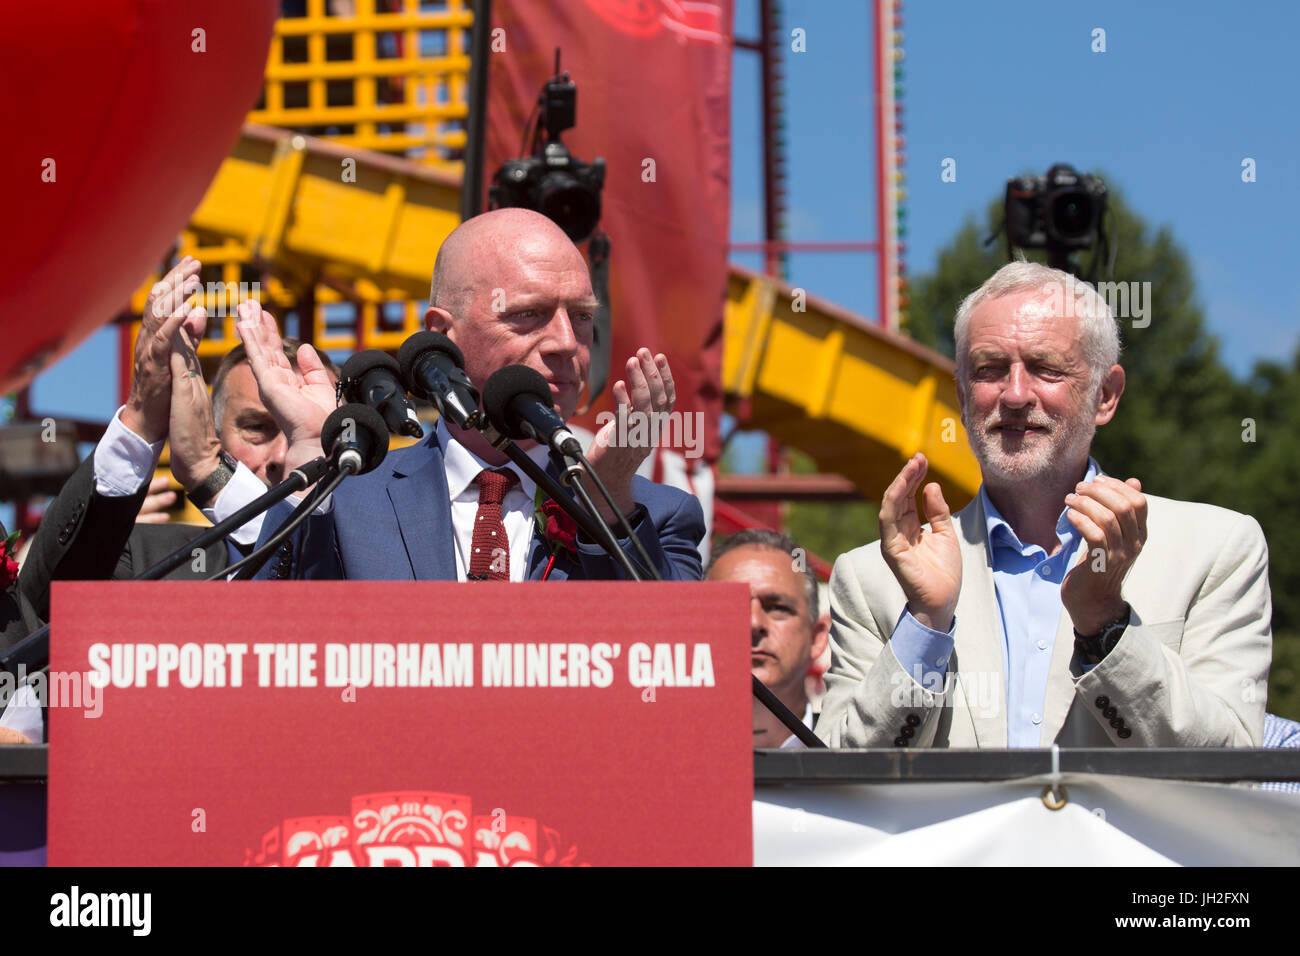 Matt Wrack, General Secretary of the Fire Brigades Union, is applauded by jeremy Corbyn, at the Durham Miners' Gala at Durham City, England. Stock Photo